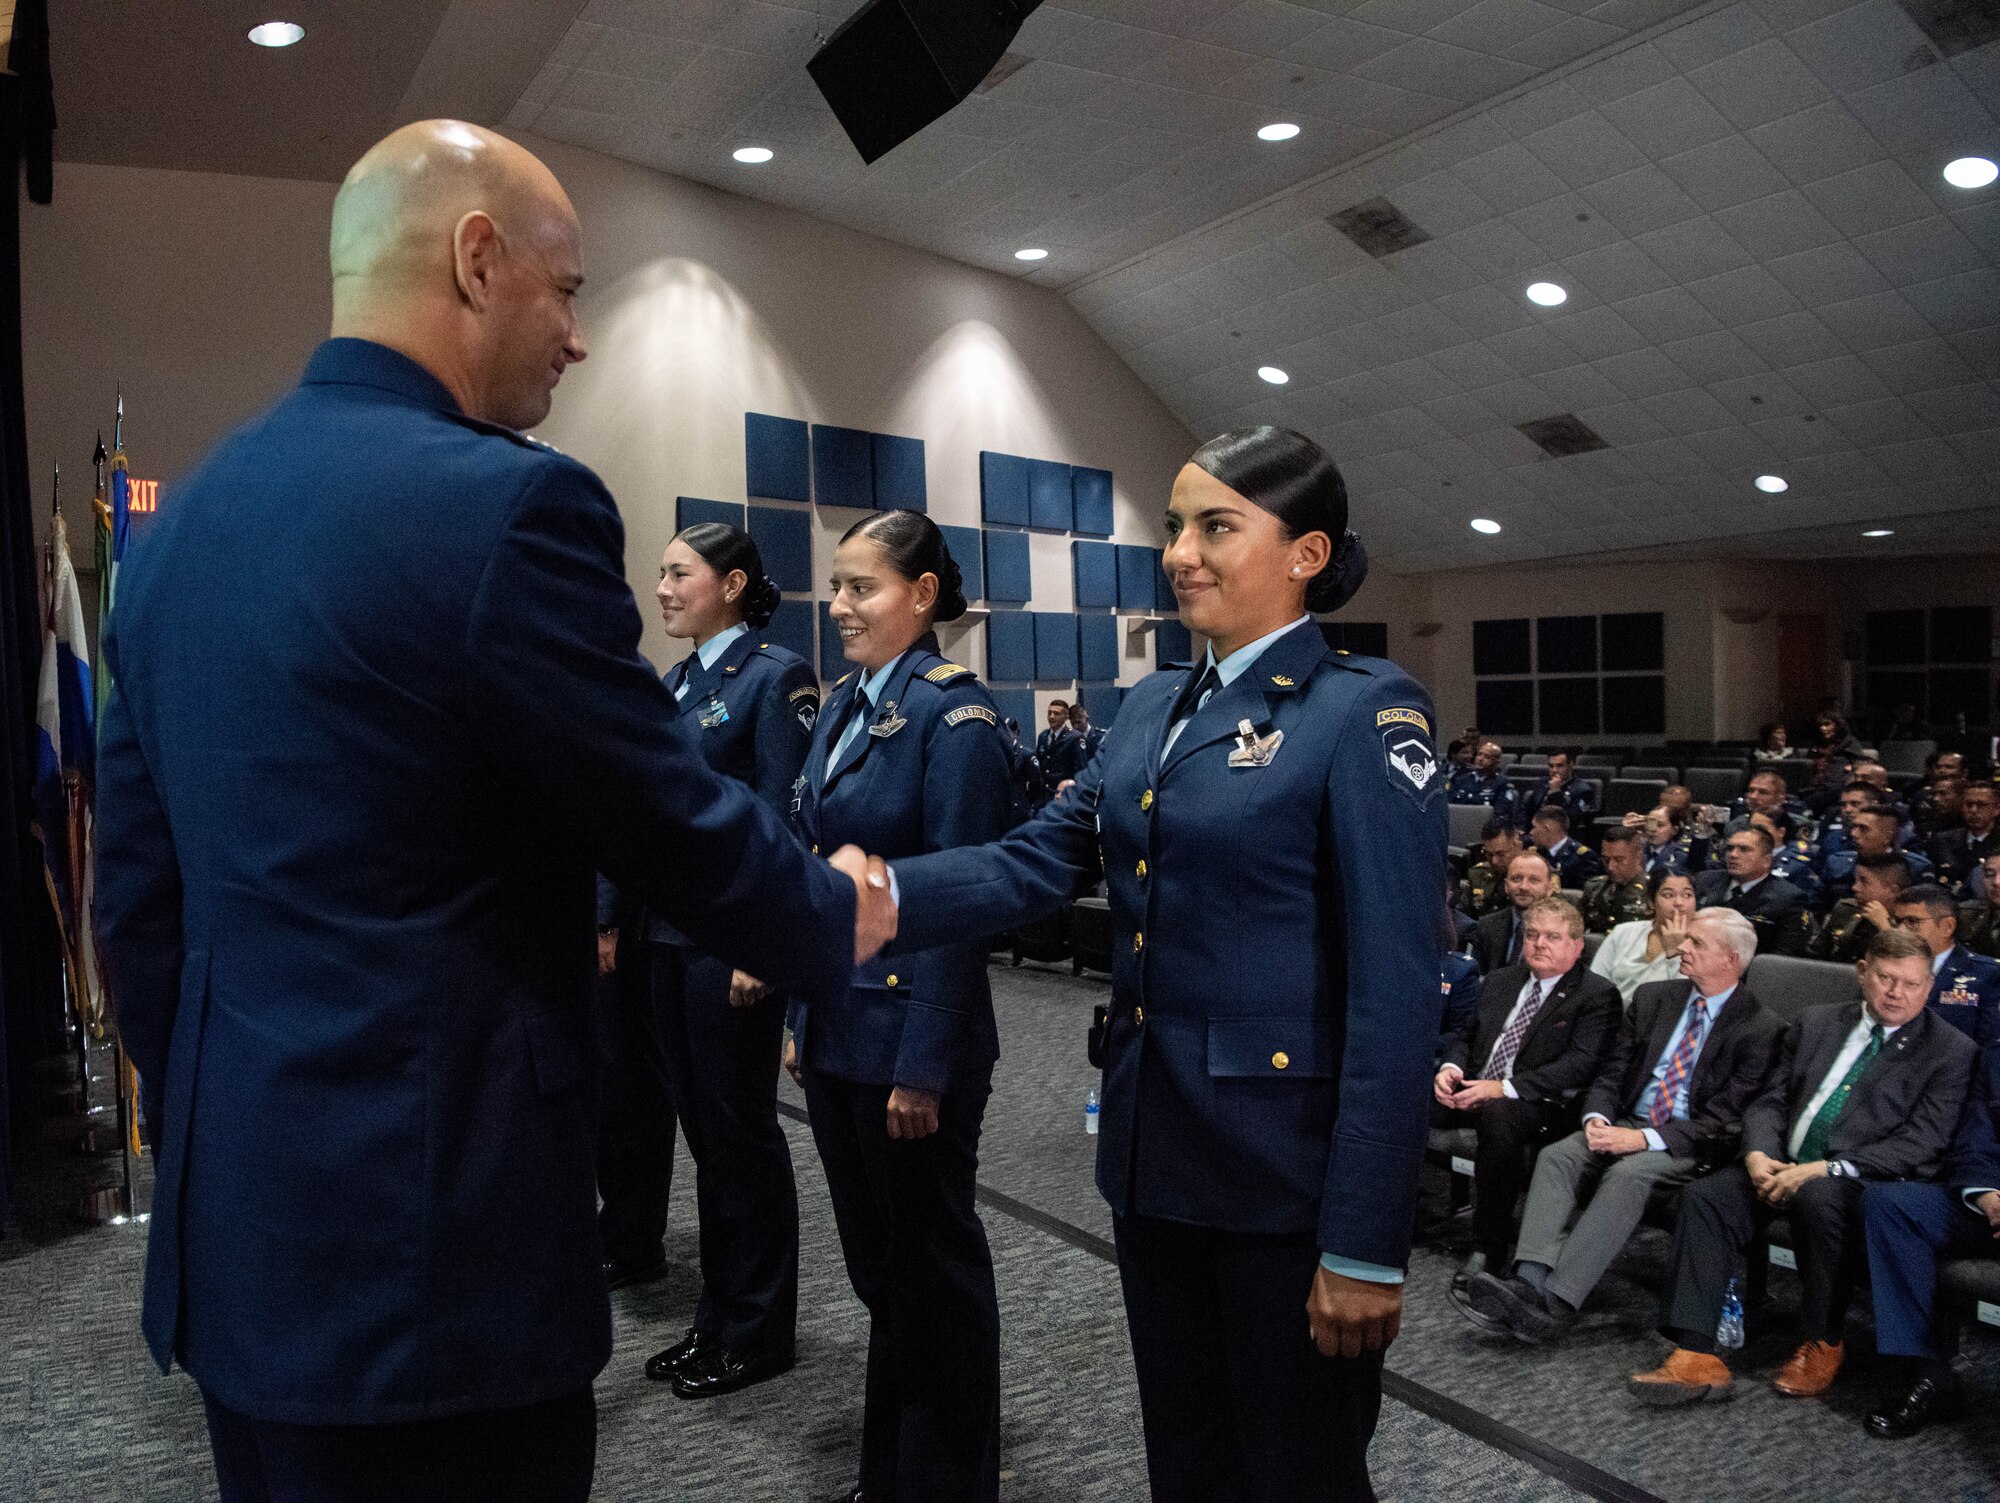 Col. José Jiménez, Jr., commandant of the Inter-American Air Forces Academy, shakes hands with an international military during the Academy’s graduation ceremony at Joint Base San Antonio-Lackland, Texas, Dec. 7, 2022. More than 150 international military students from 12 partner nations across Latin America and the USAF graduated during the last training cycle of 2022. (U.S. Air Force photo by Vanessa R. Adame)